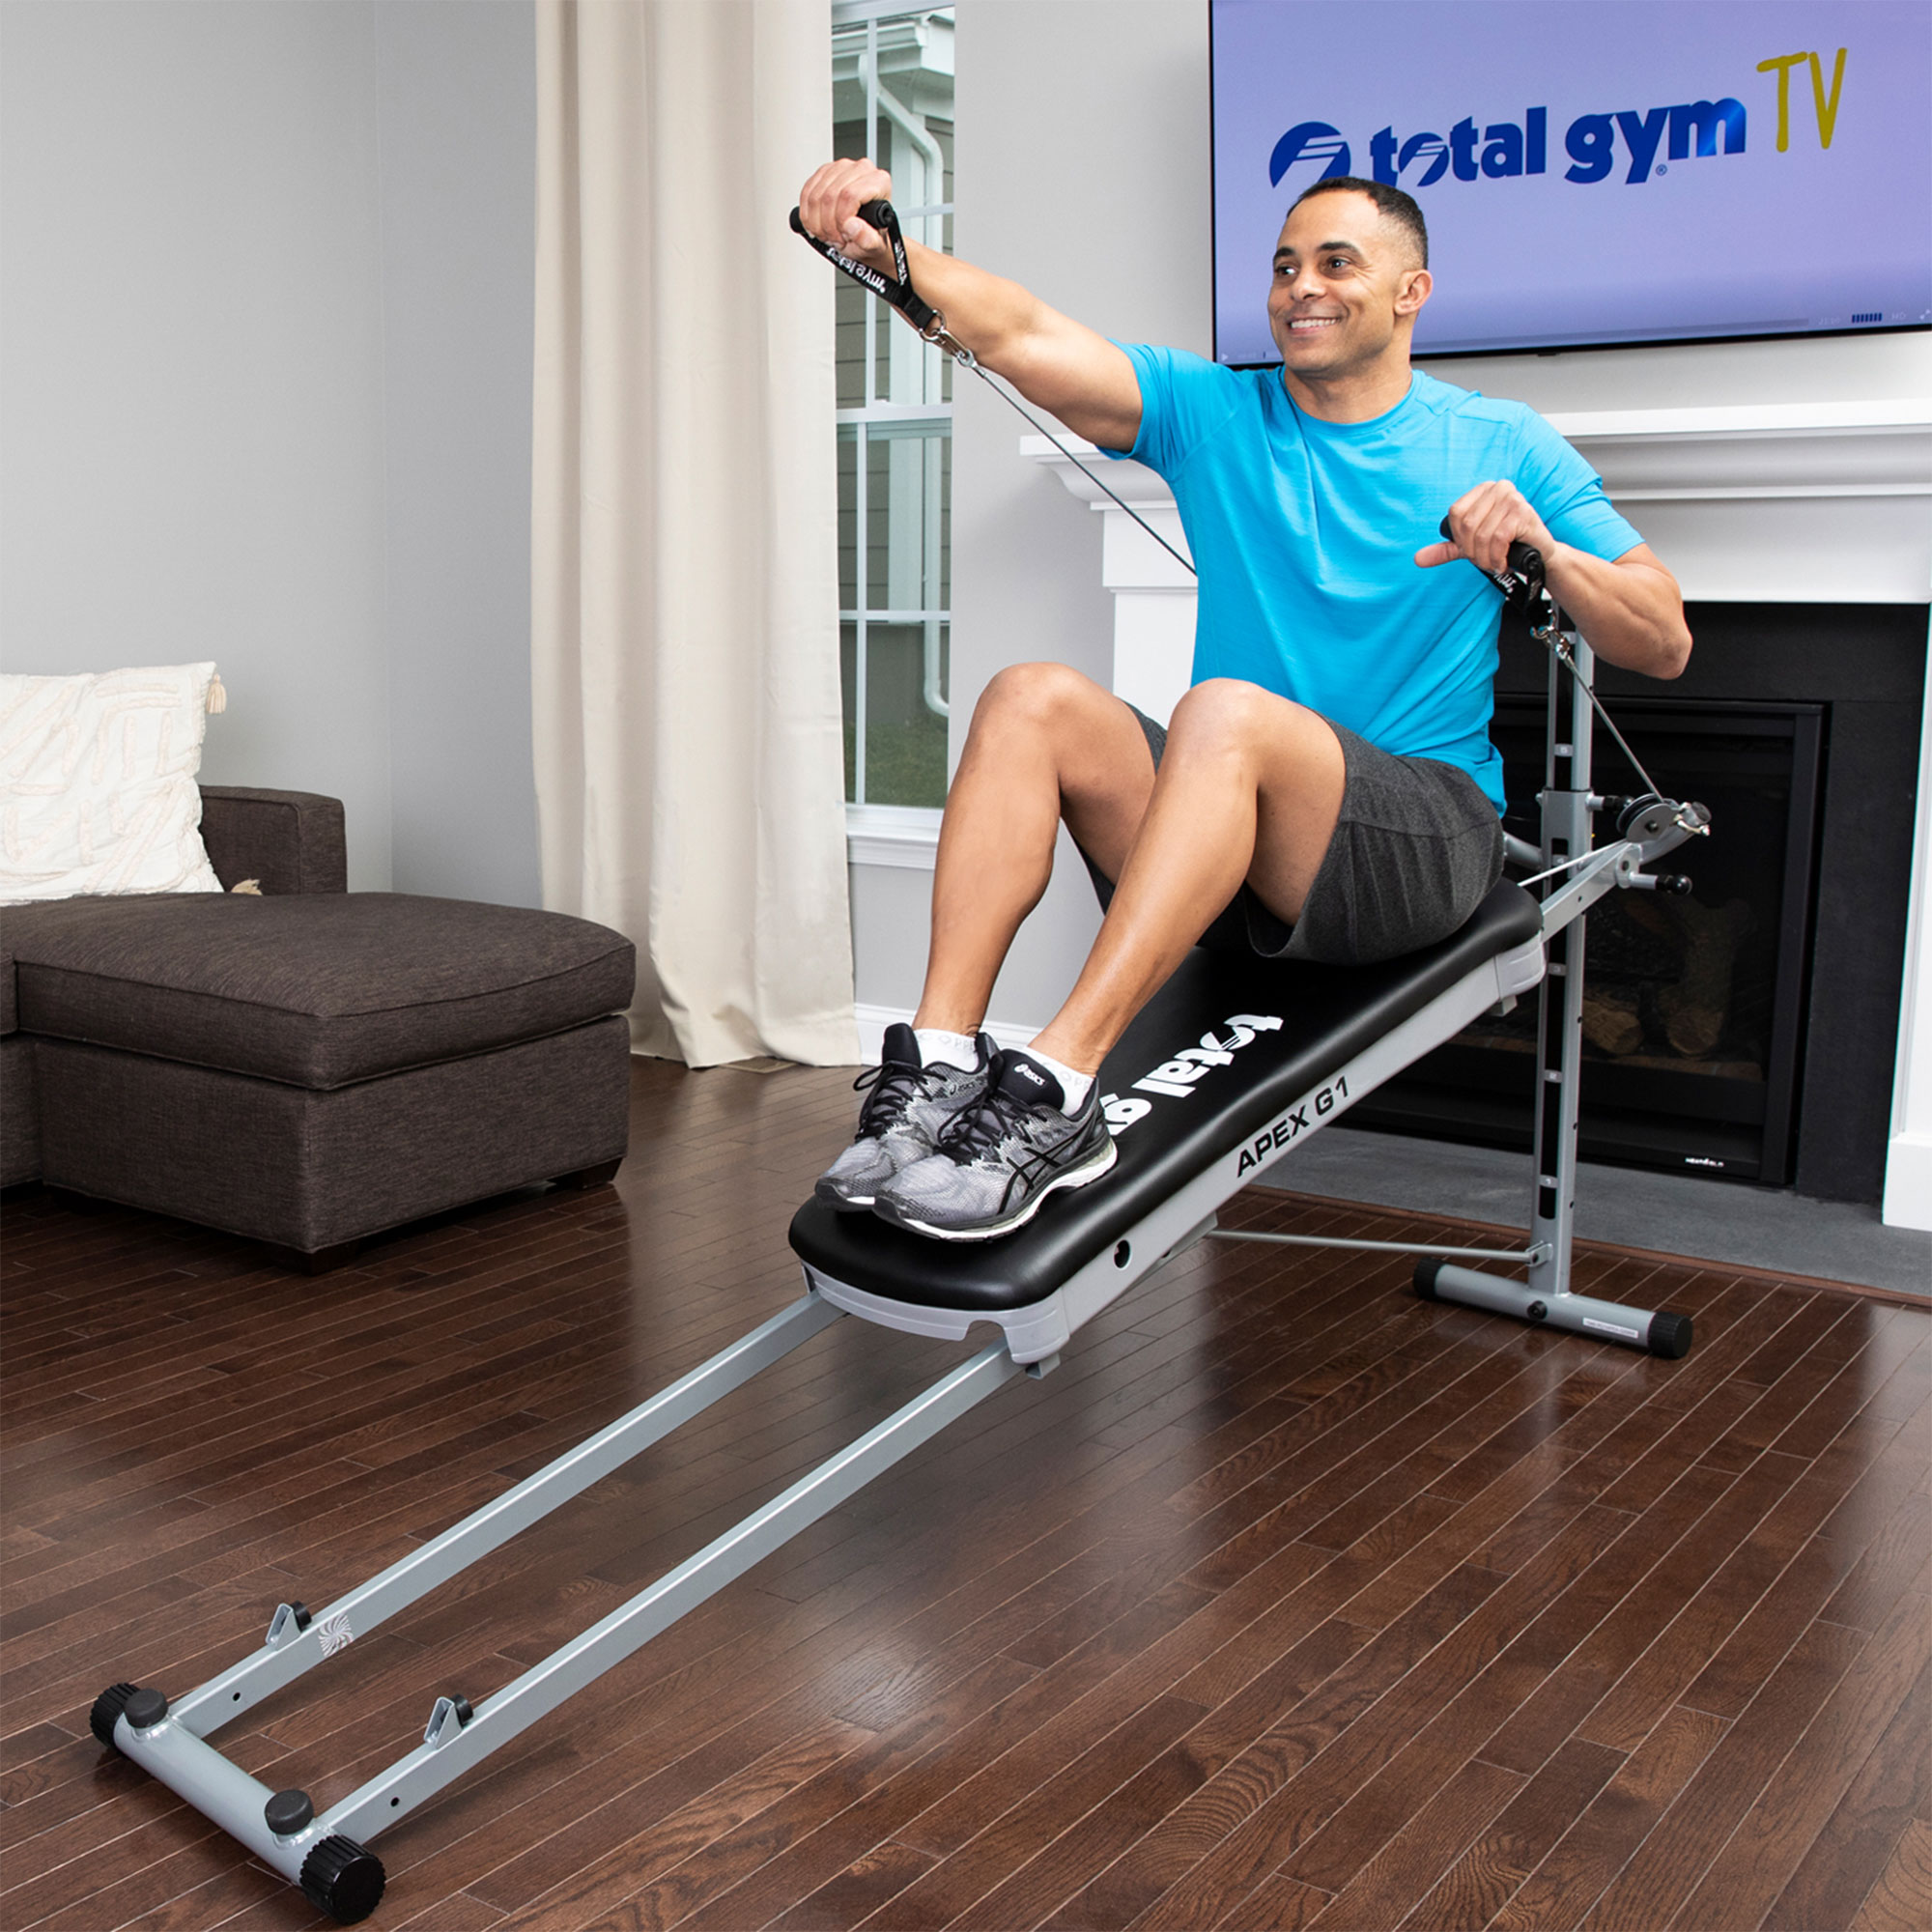 Total Gym APEX G1 Home Fitness Incline Weight Training w/Resistance Levels - image 5 of 12